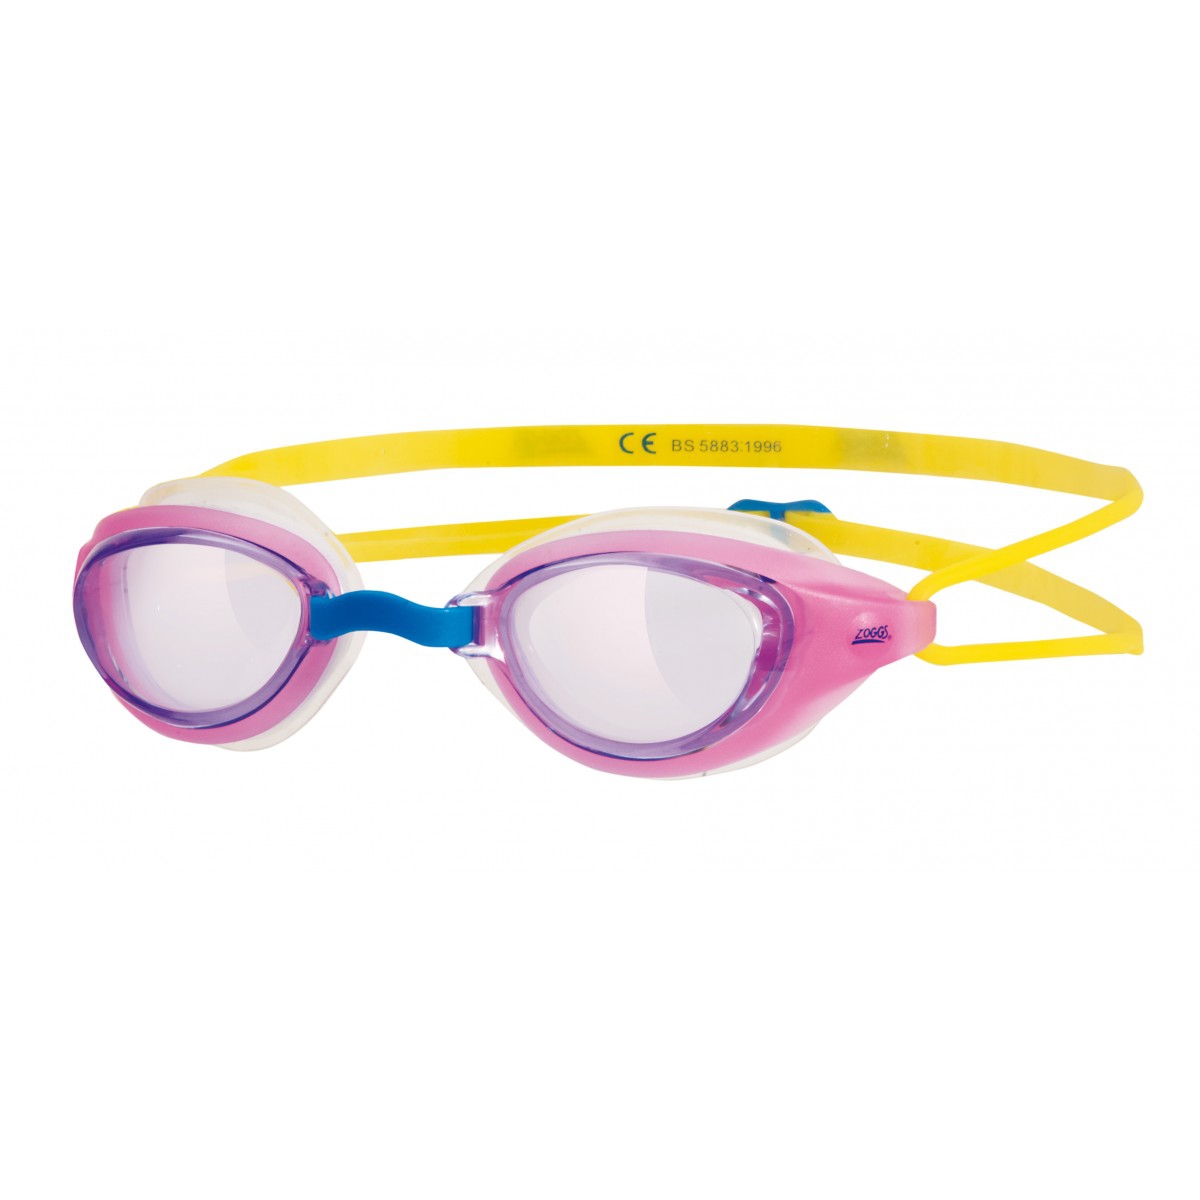 Sonic Air Junior 'Pink & Yellow' Swimming Goggles 6-14 Years Pool